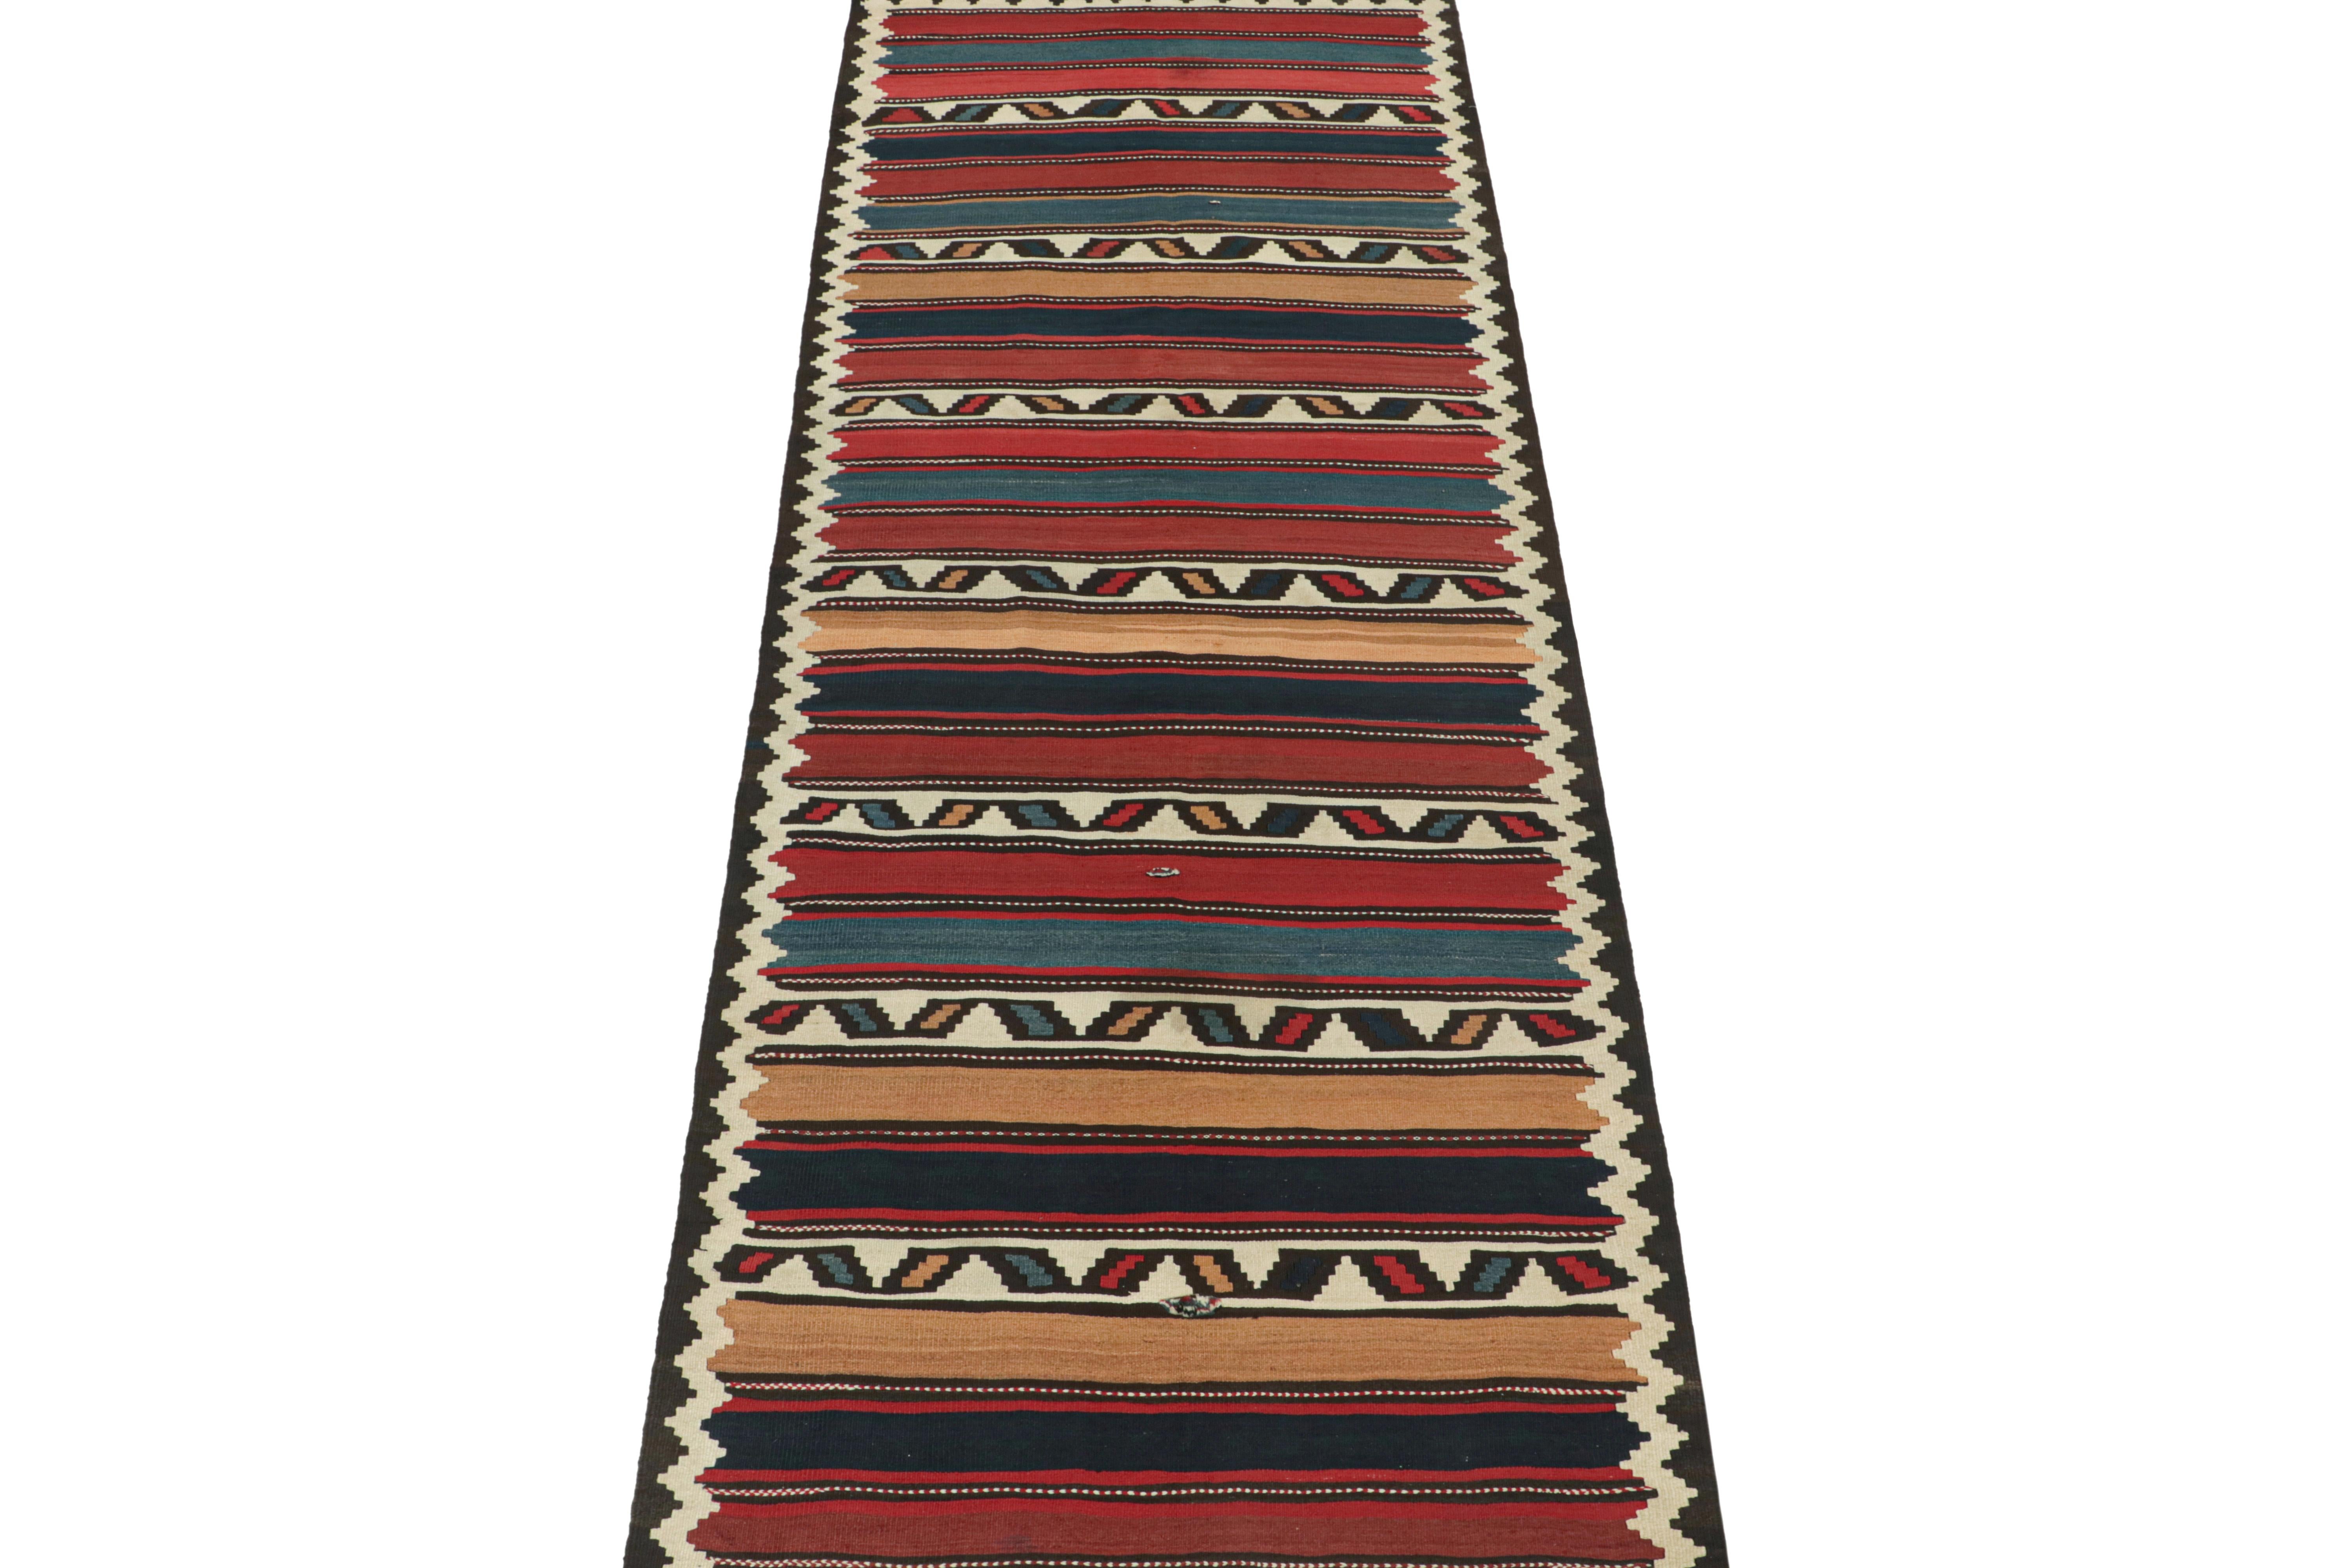 This vintage 5x14 Persian Kilim is a midcentury gallery runner believed to be a Shahsavan tribal rug. 

Handwoven in wool circa 1950-1960, its design favors traditional red, blue, and beige hues in stripes and geometric patterns on a rich brown